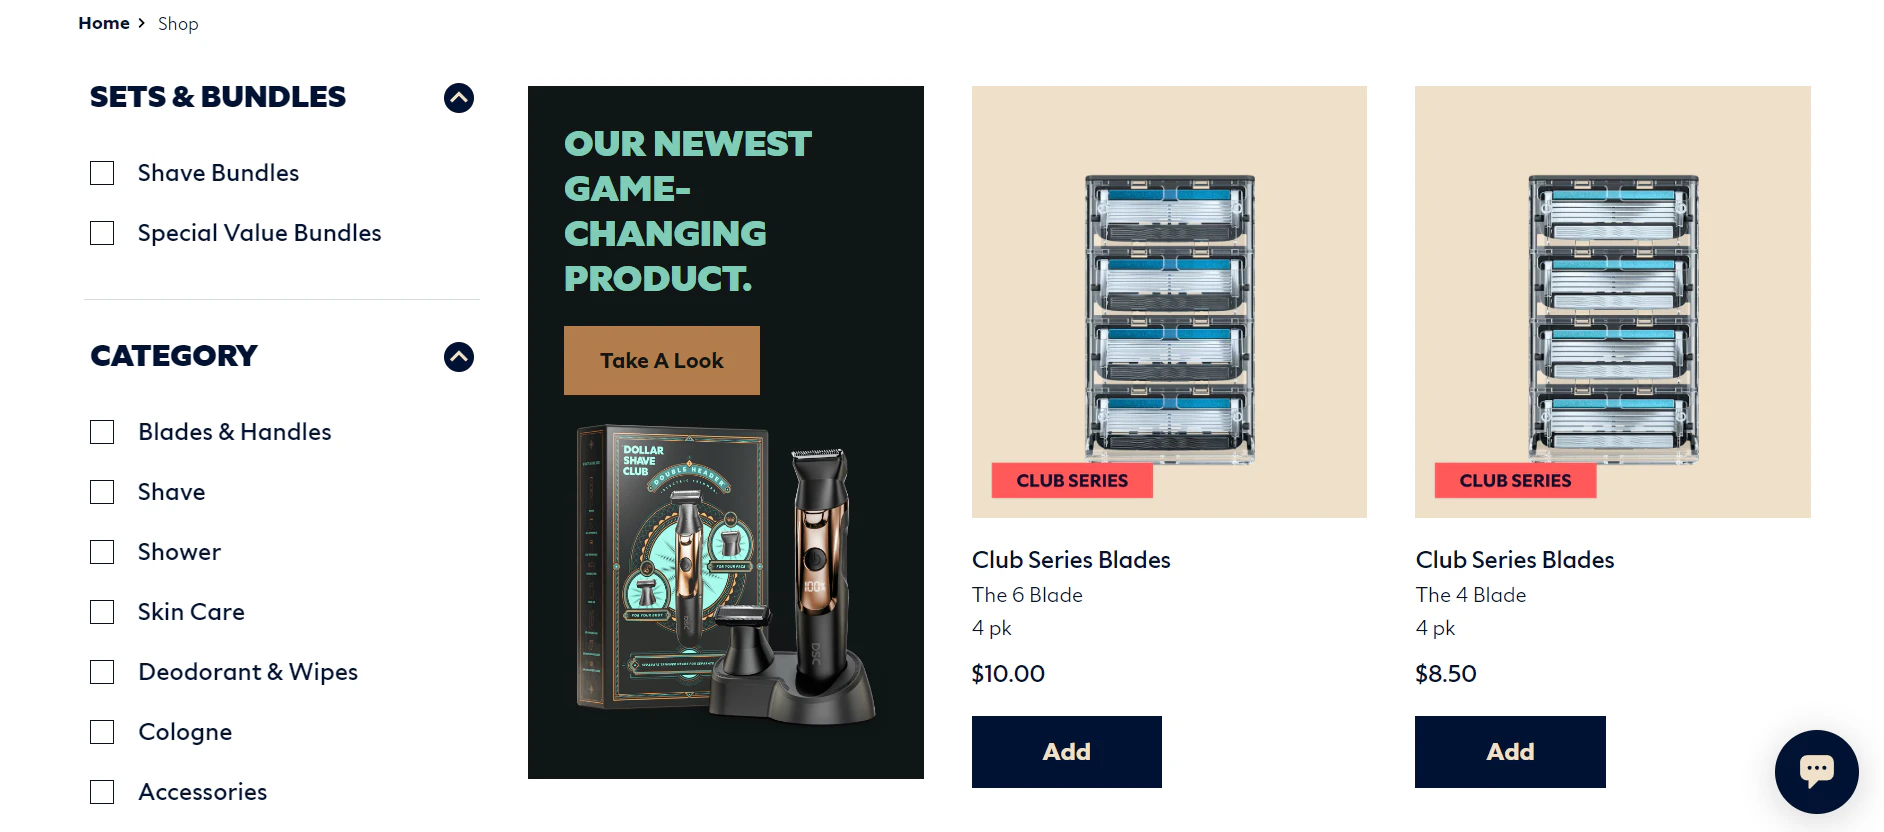 Dollar Shave Club's products are well arranged and use a clean Shopify theme